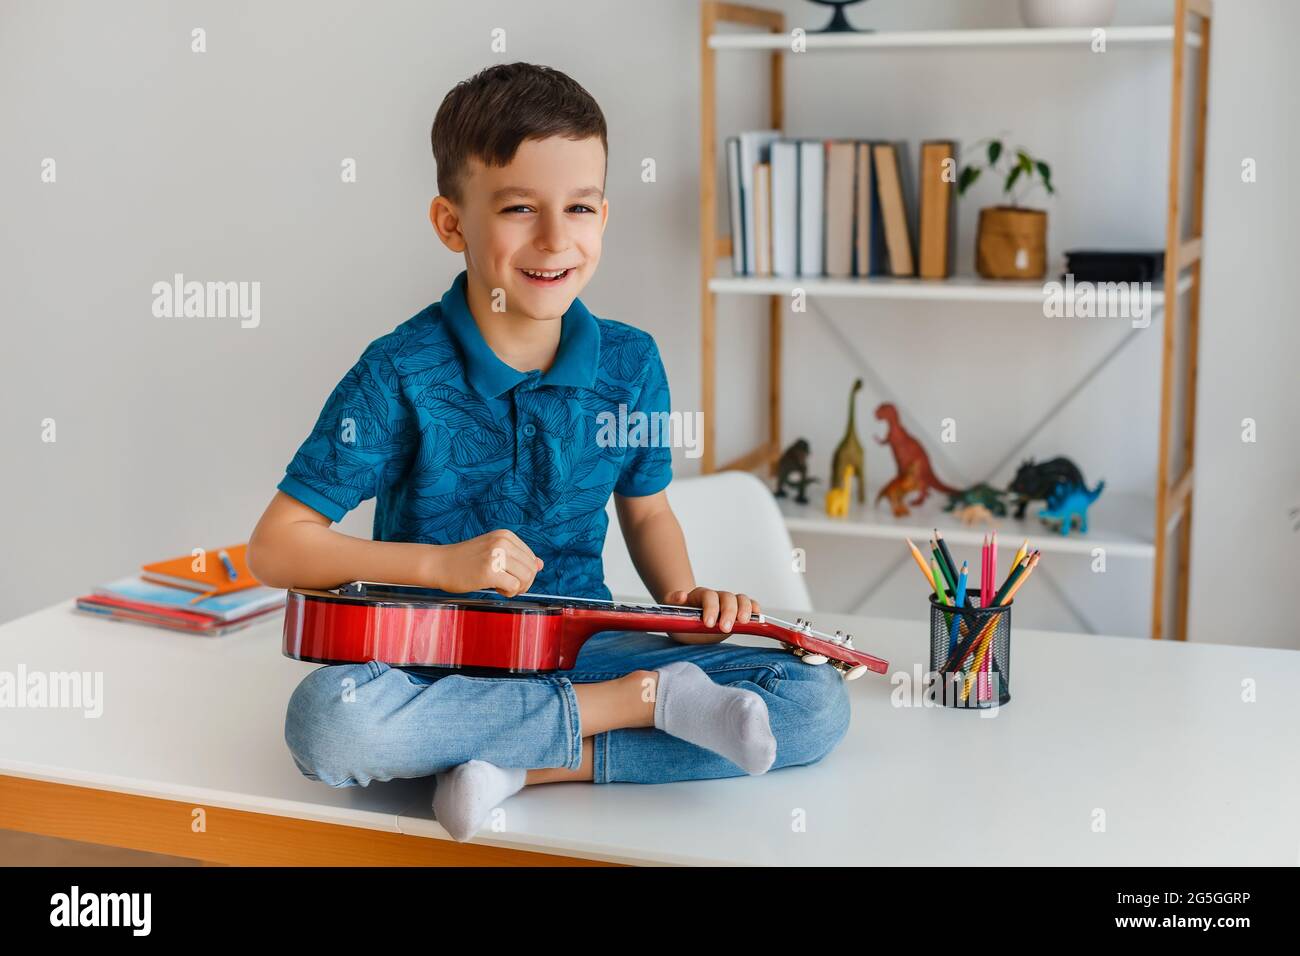 Talented kid playing soprano ukulele sitting on desk. Preschool boy learning guitar at leisure. Concept of early childhood education and music hobby Stock Photo